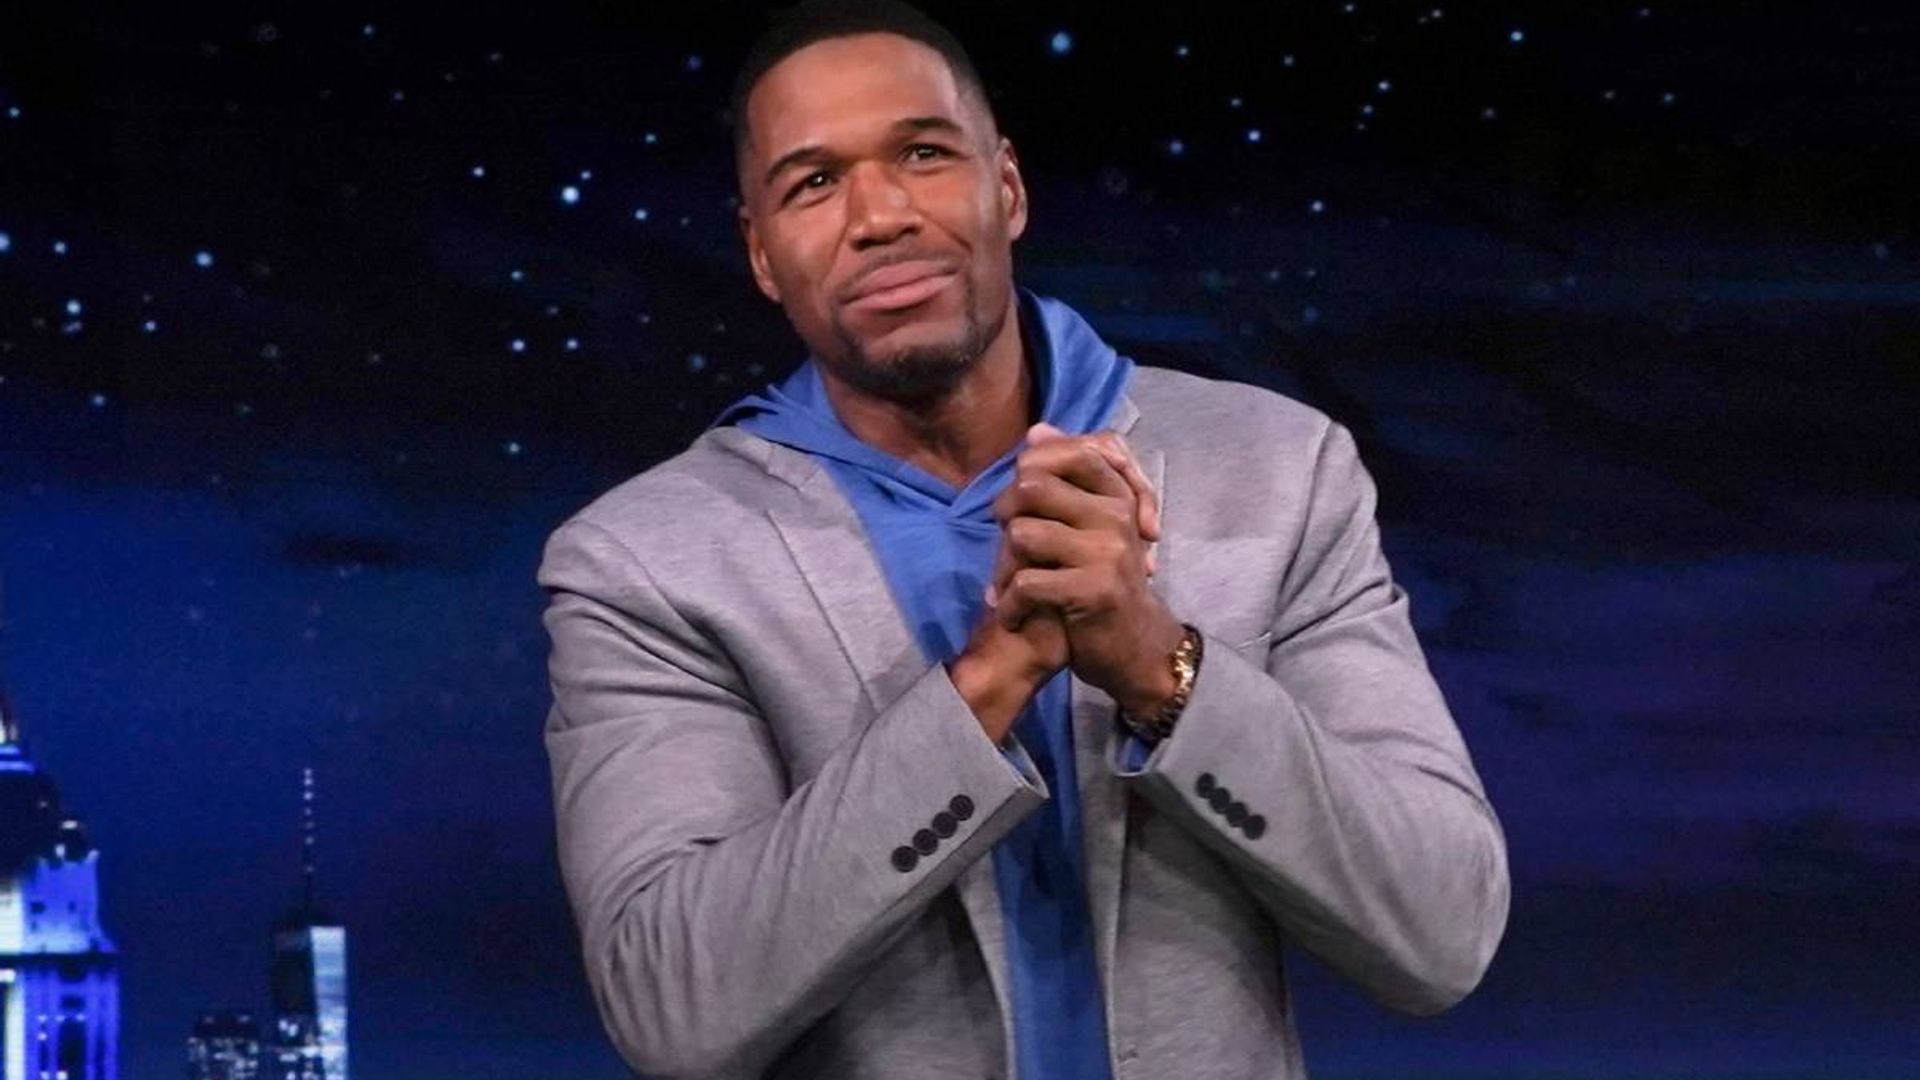 Michael Strahan makes fans nostalgic with latest Super Bowl tribute video